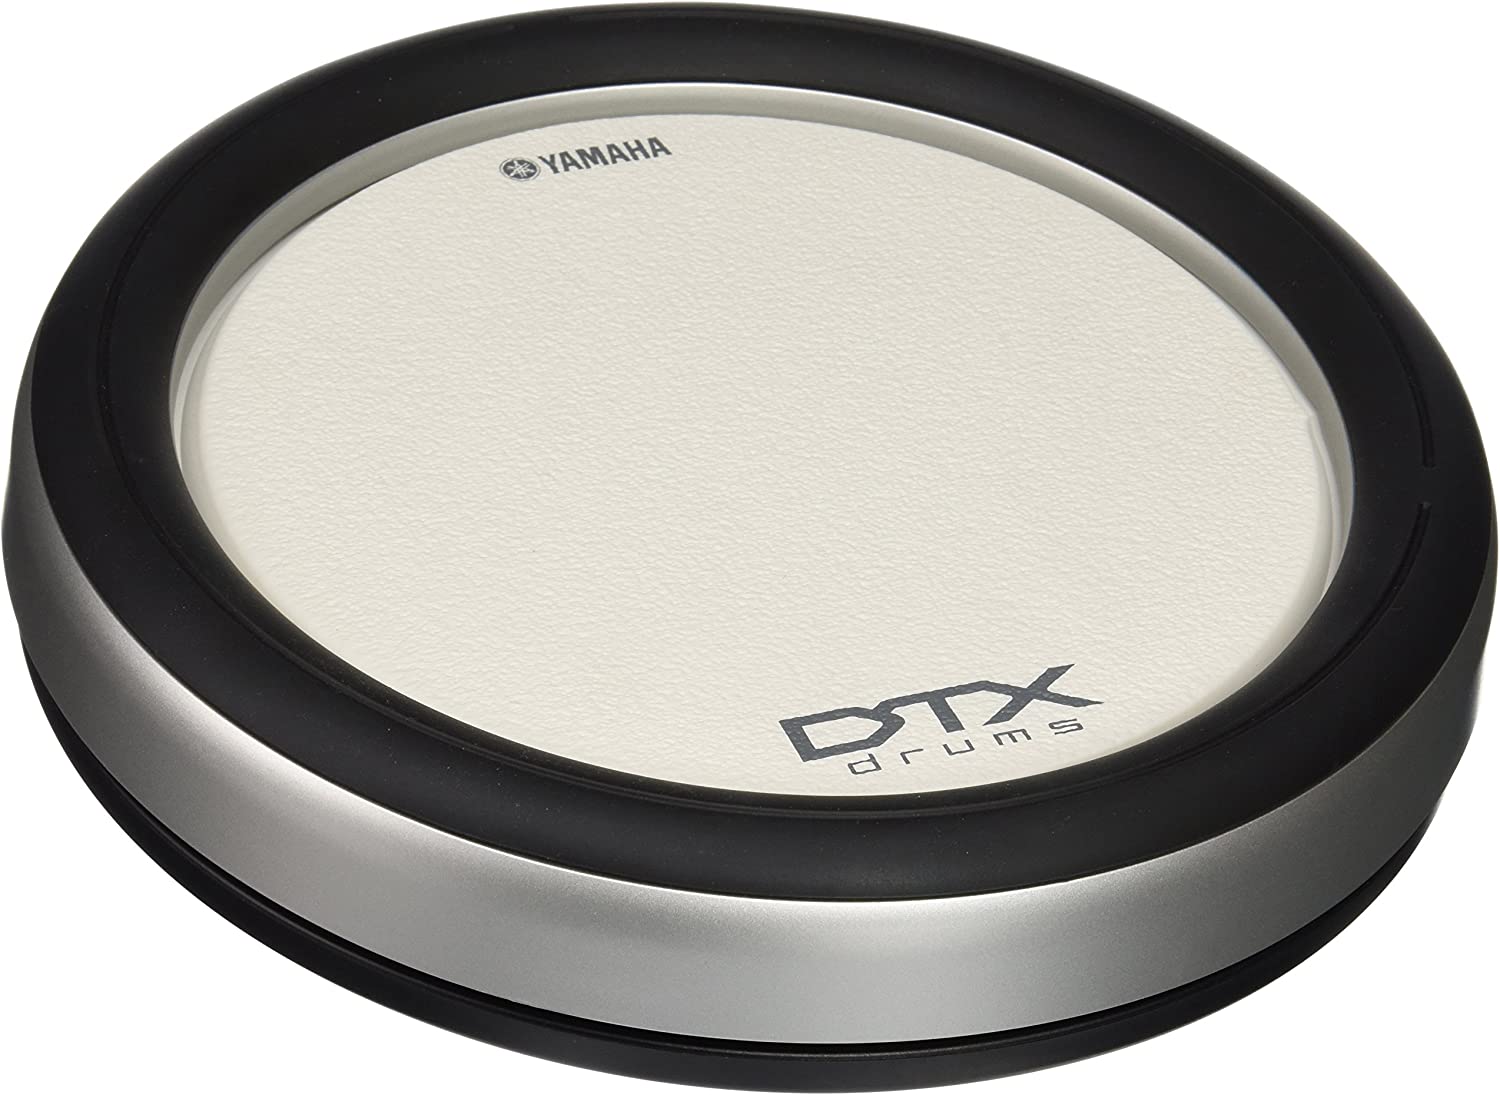 Yamaha XP80 Snare Tom DTX Pad 8 inch 3-Zone Electronic Drum Pad Textured TCS